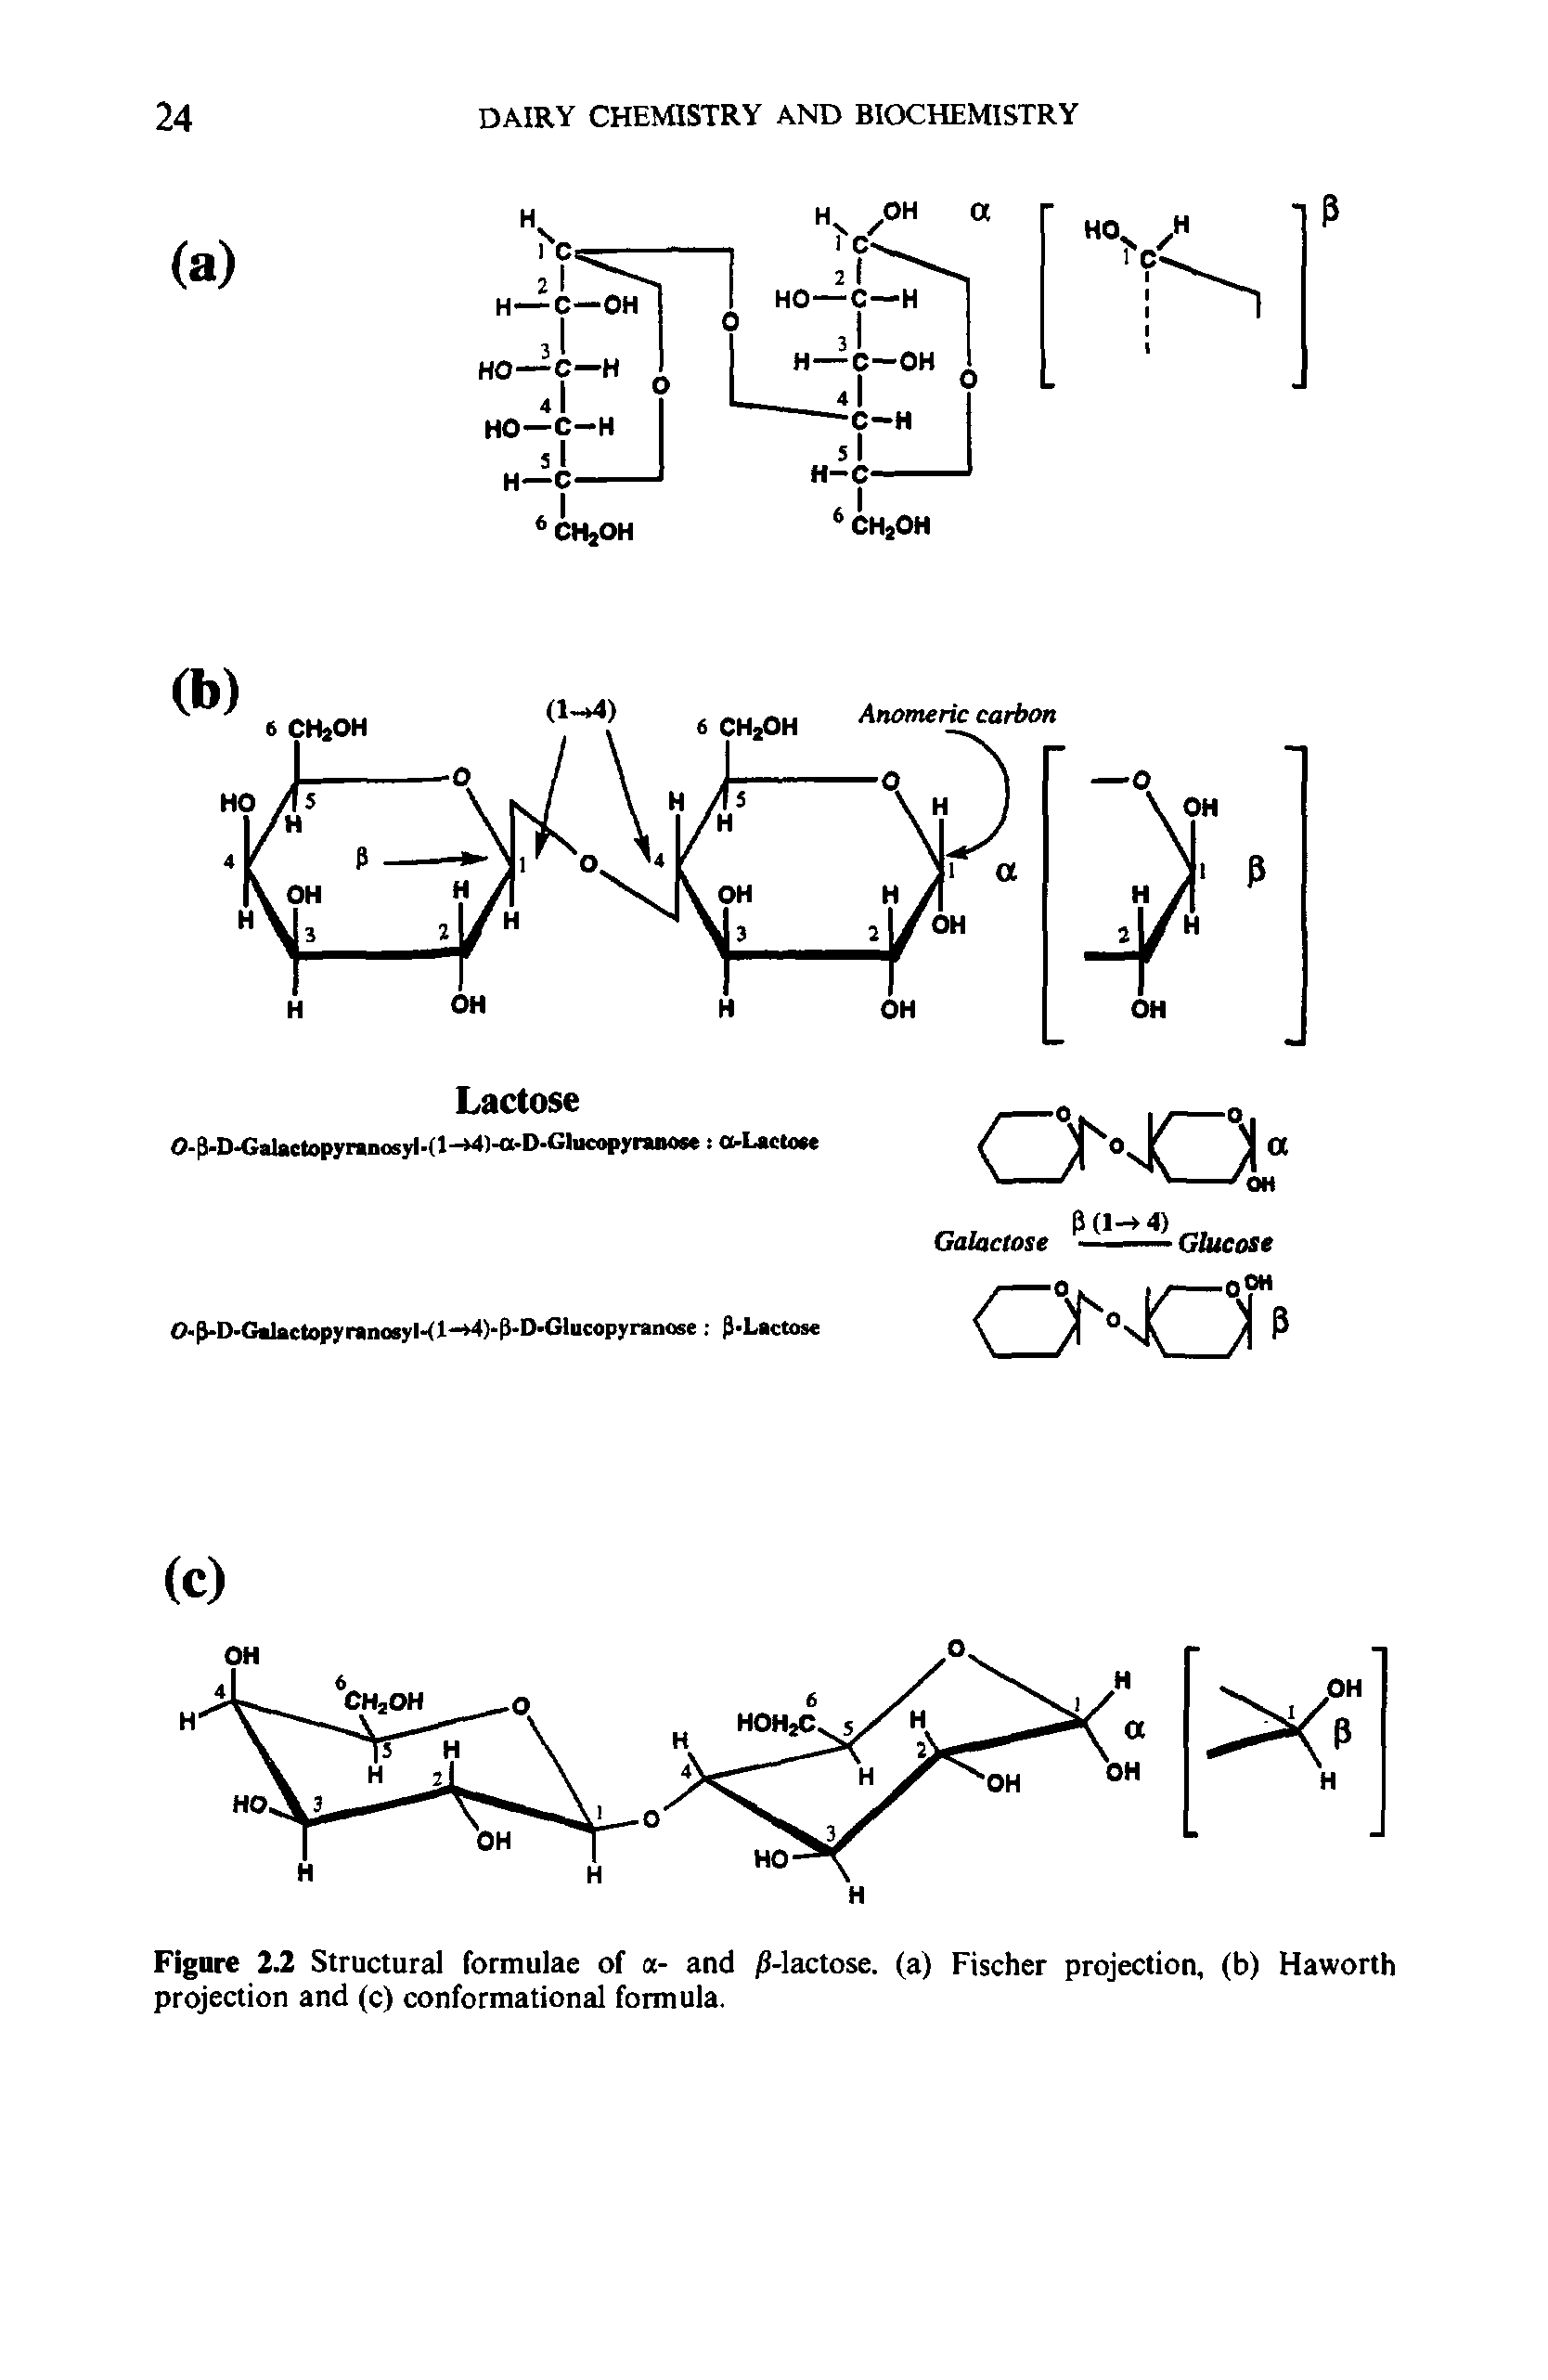 Figure 2.2 Structural formulae of a- and /3-lactose, (a) Fischer projection, (b) Haworth projection and (c) conformational formula.